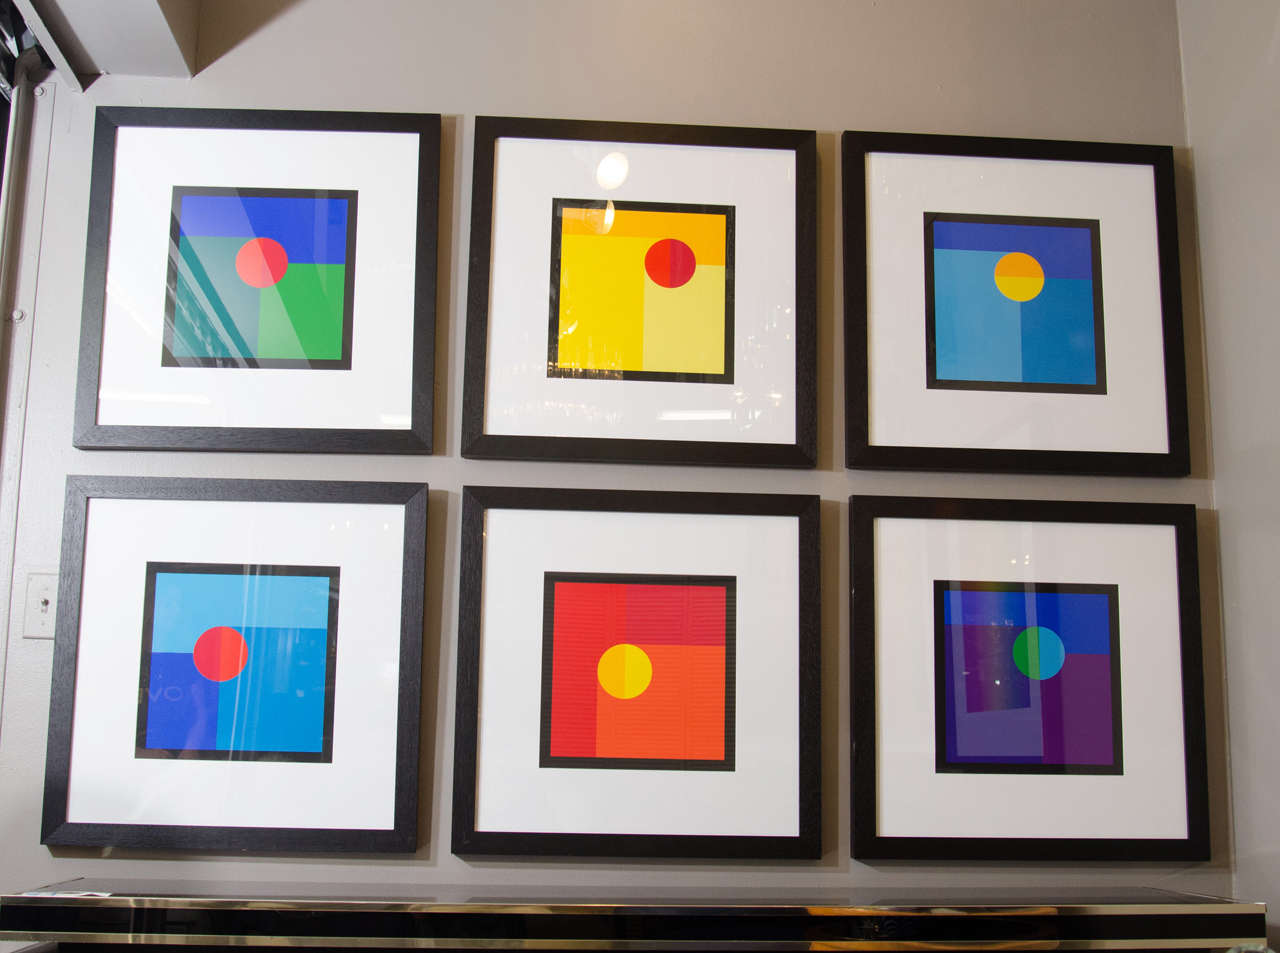 A vintage set of six geometric, colorful, silk screens by German artist Jo Niemeyer. These works draw upon early 20th century De Stijl ideas and the works of Piet Mondrian and Theo van Doesburg.

Overall good vintage condition. Two of the frames